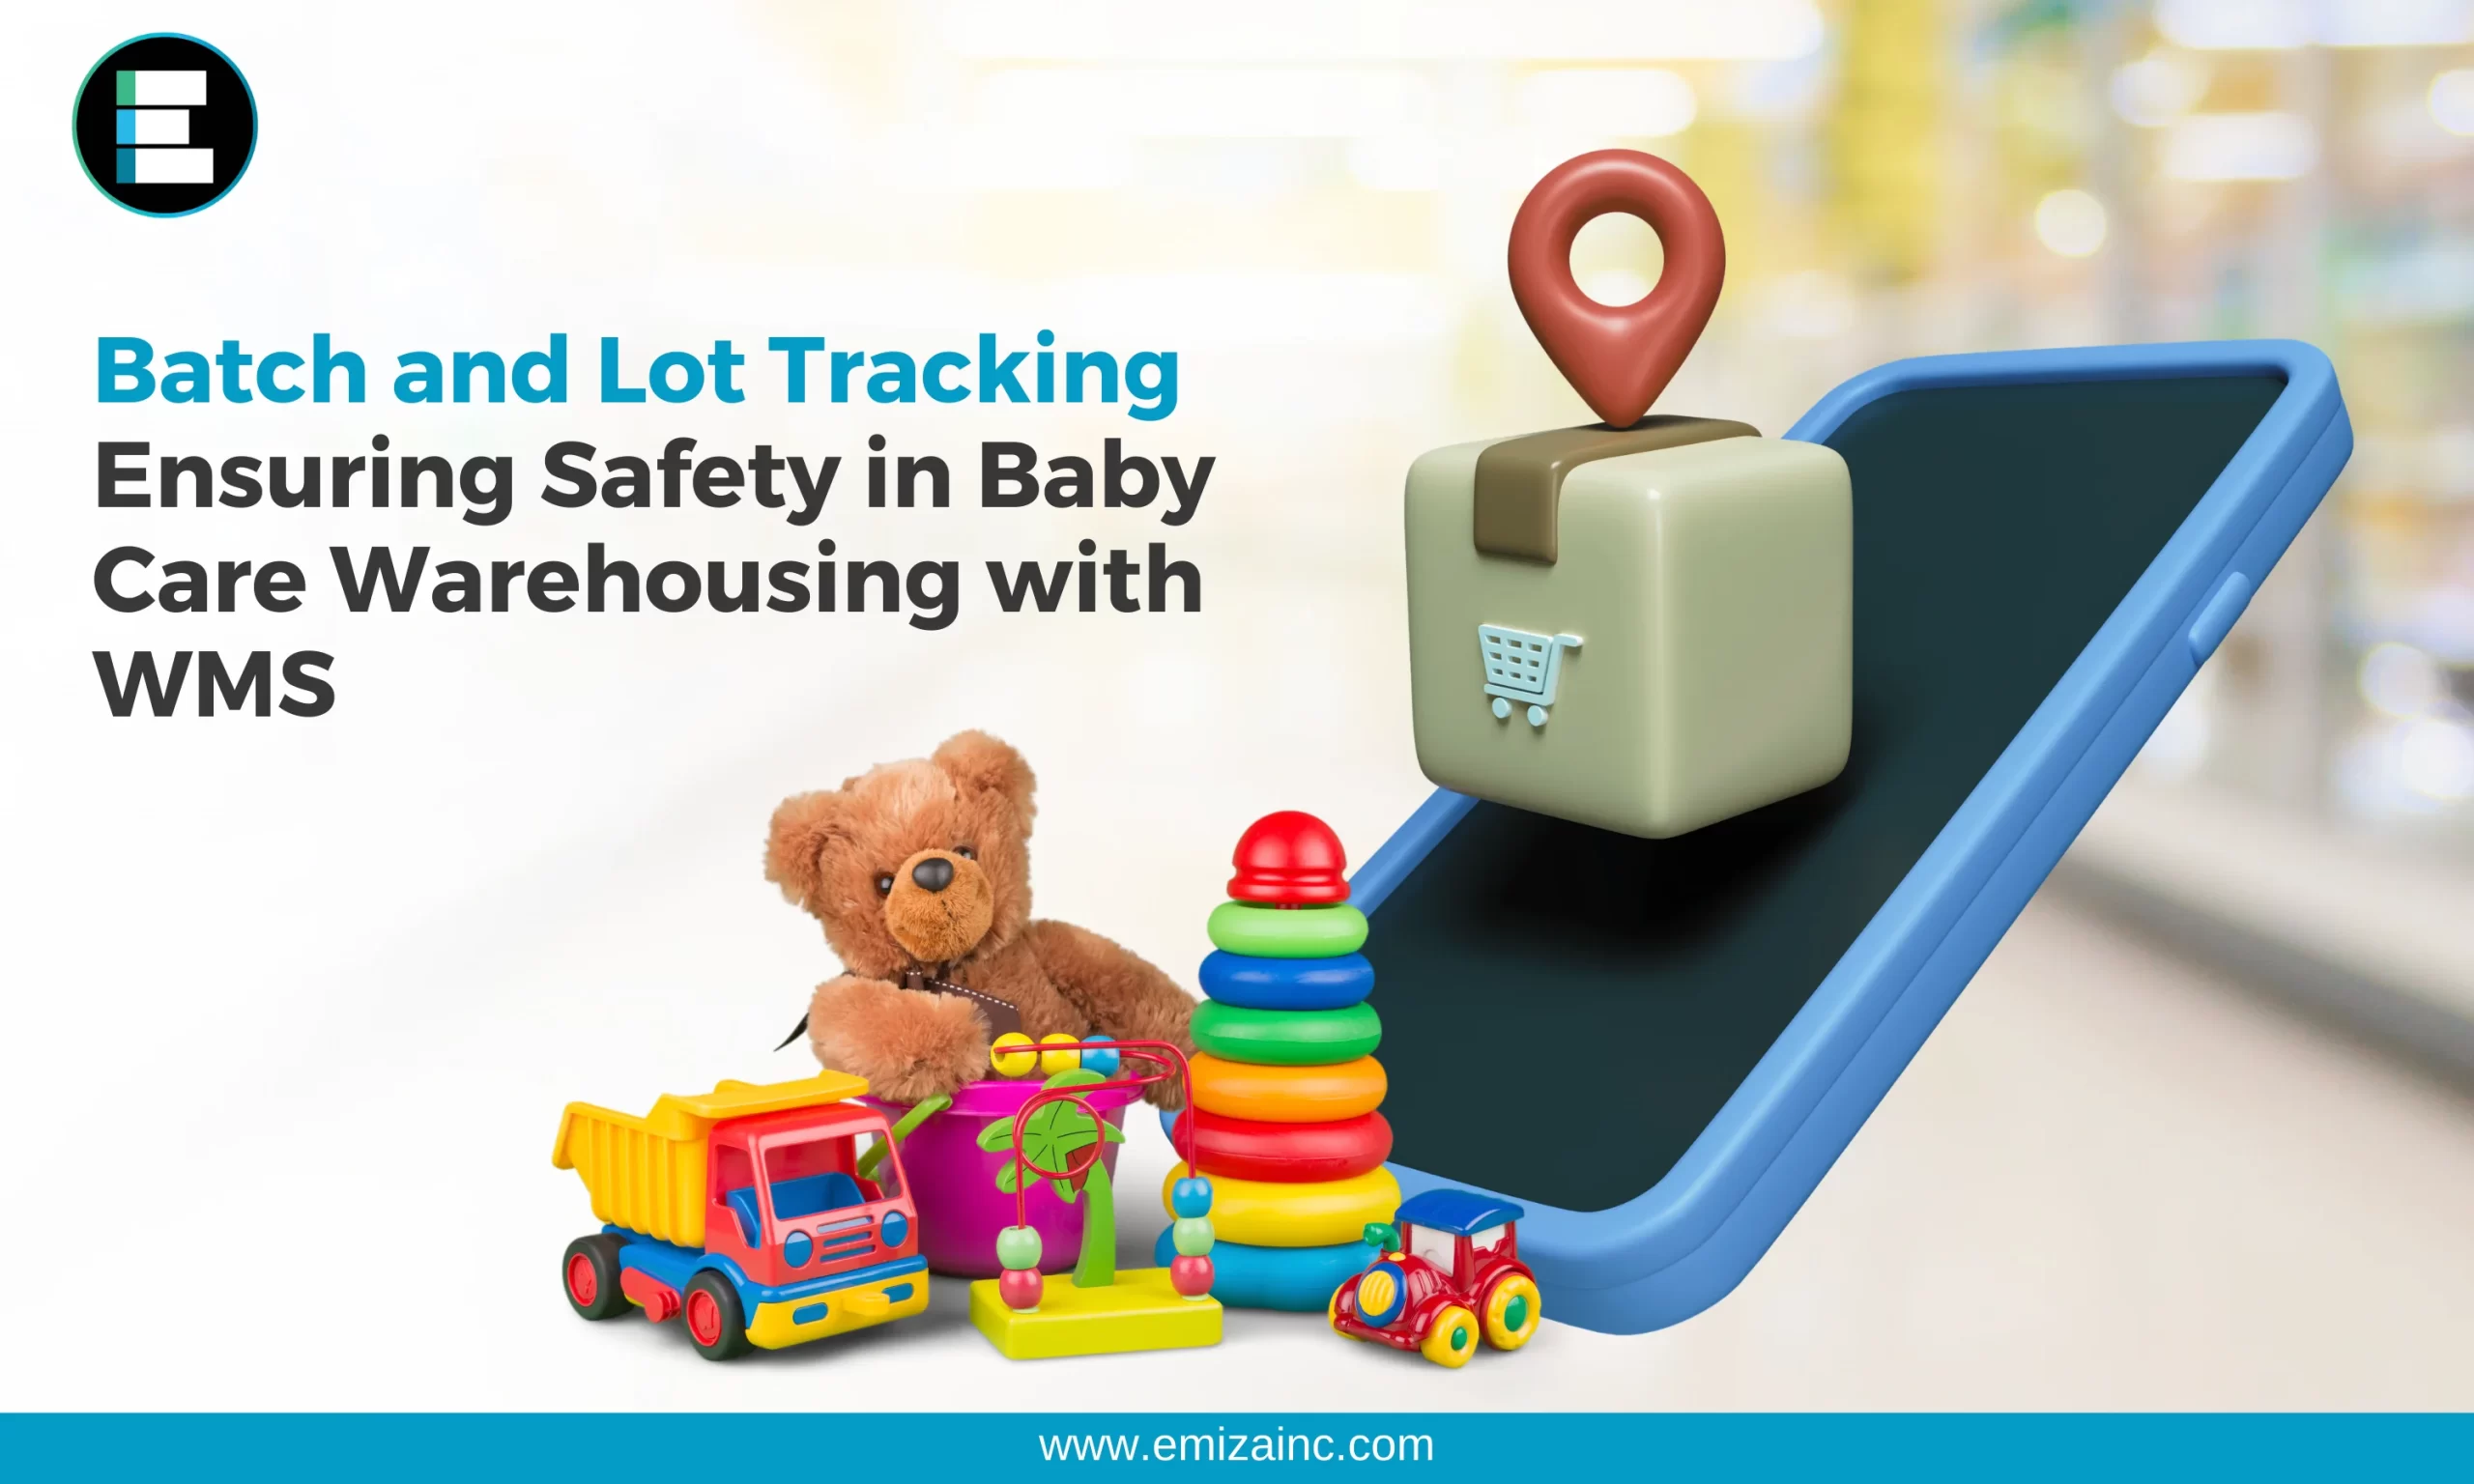 Batch and Lot Tracking Ensuring Safety in Baby Care Warehousing with WMS